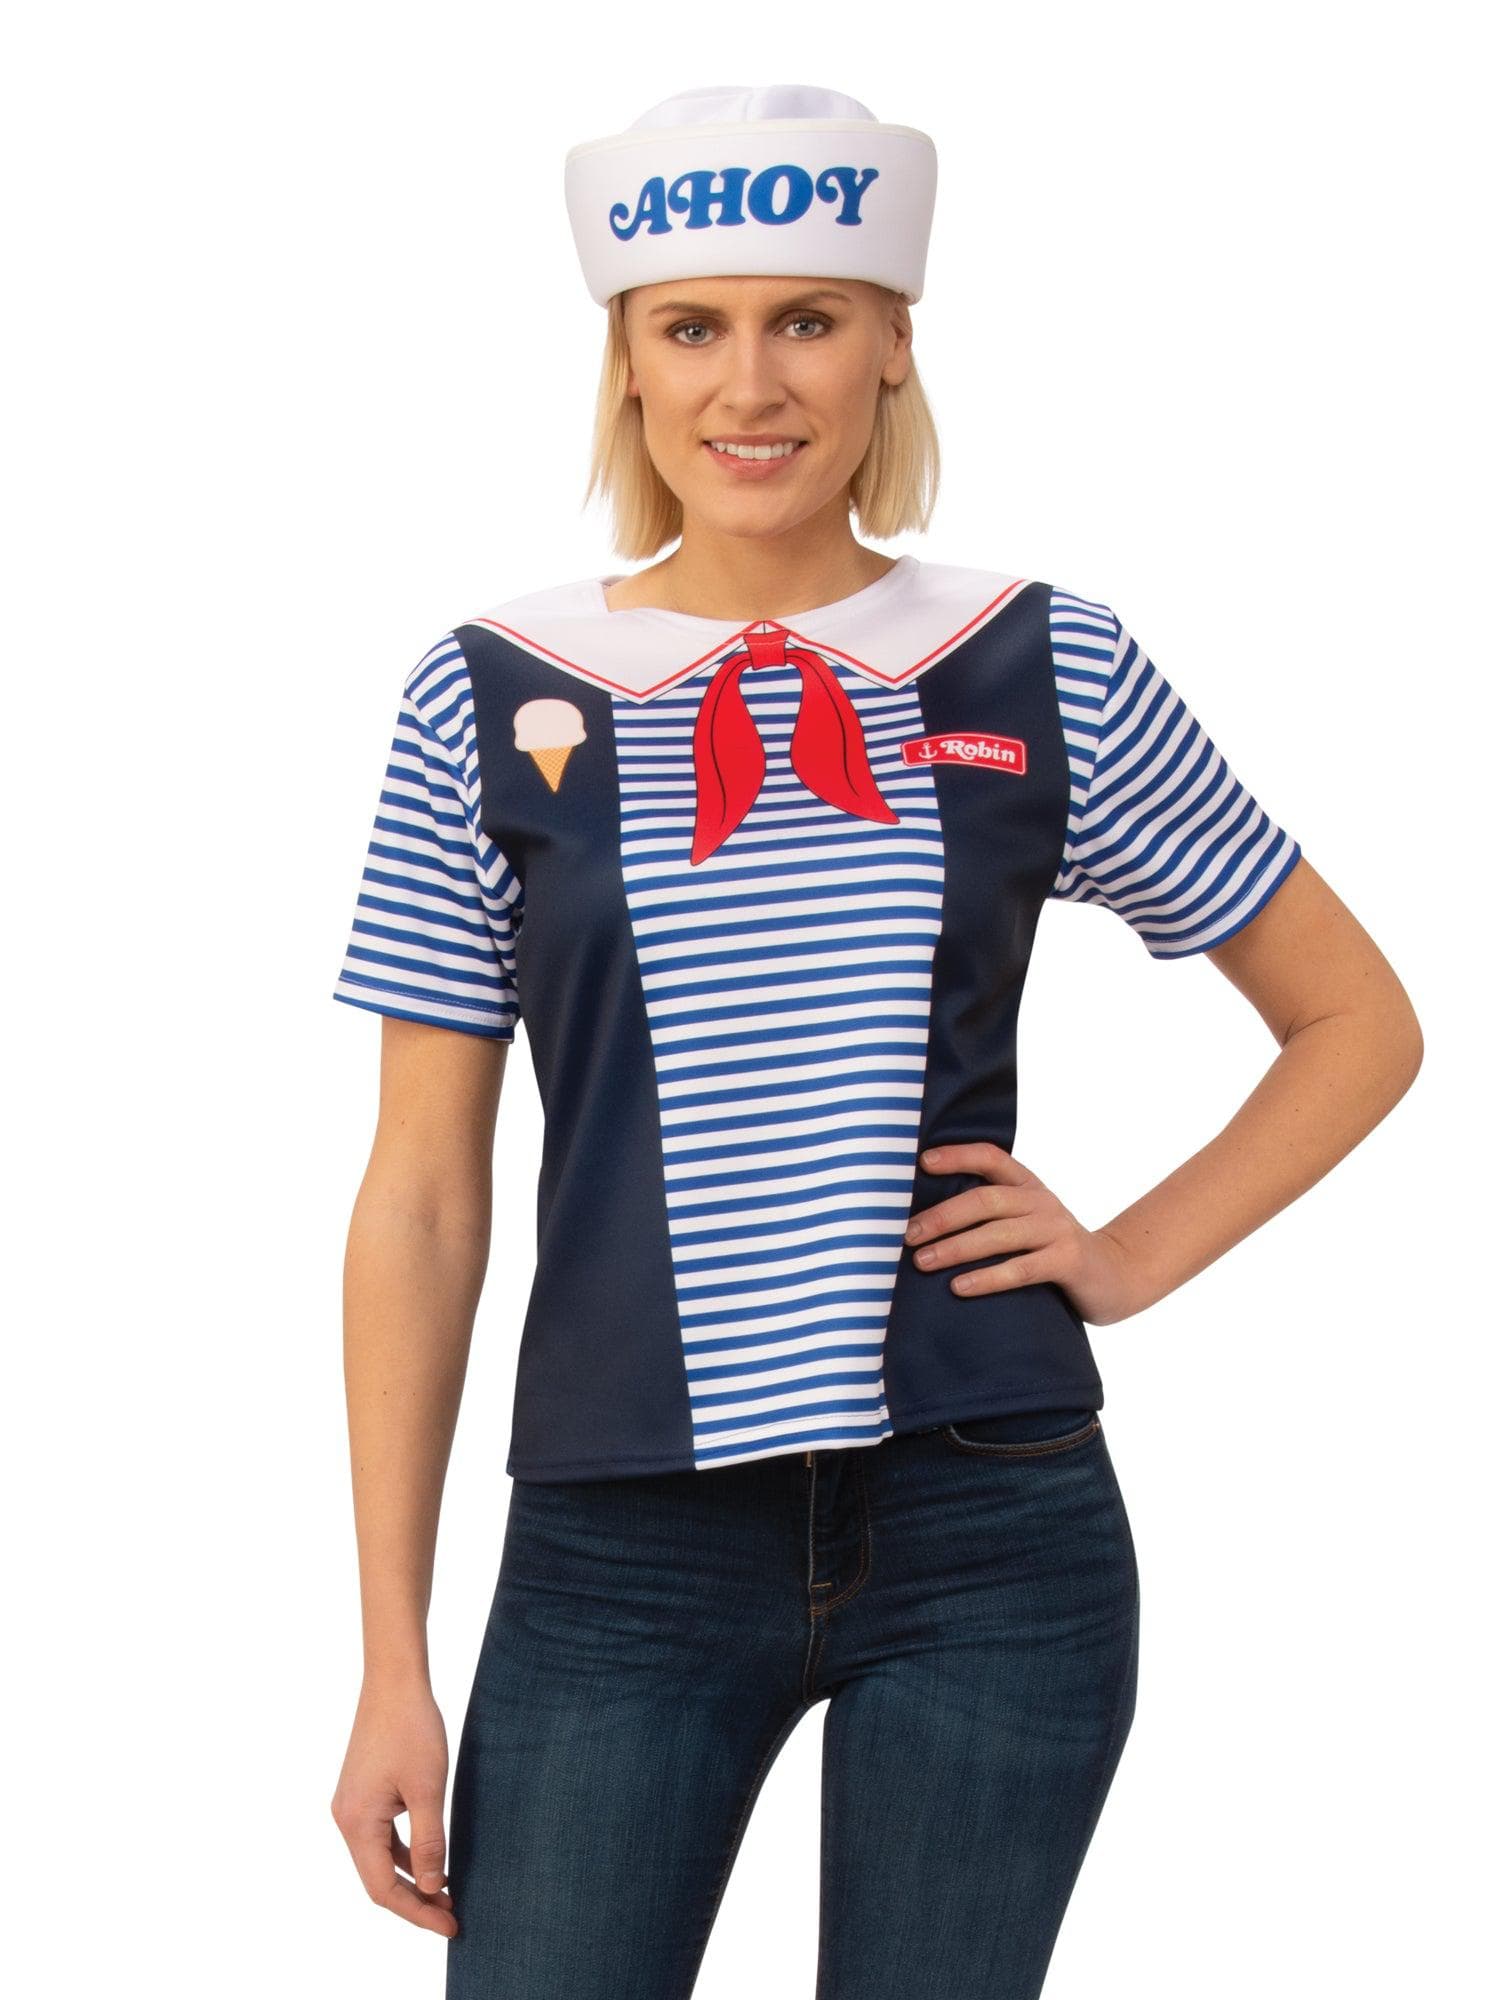 Women's Stranger Things Robin Scoops Ahoy Costume - costumes.com